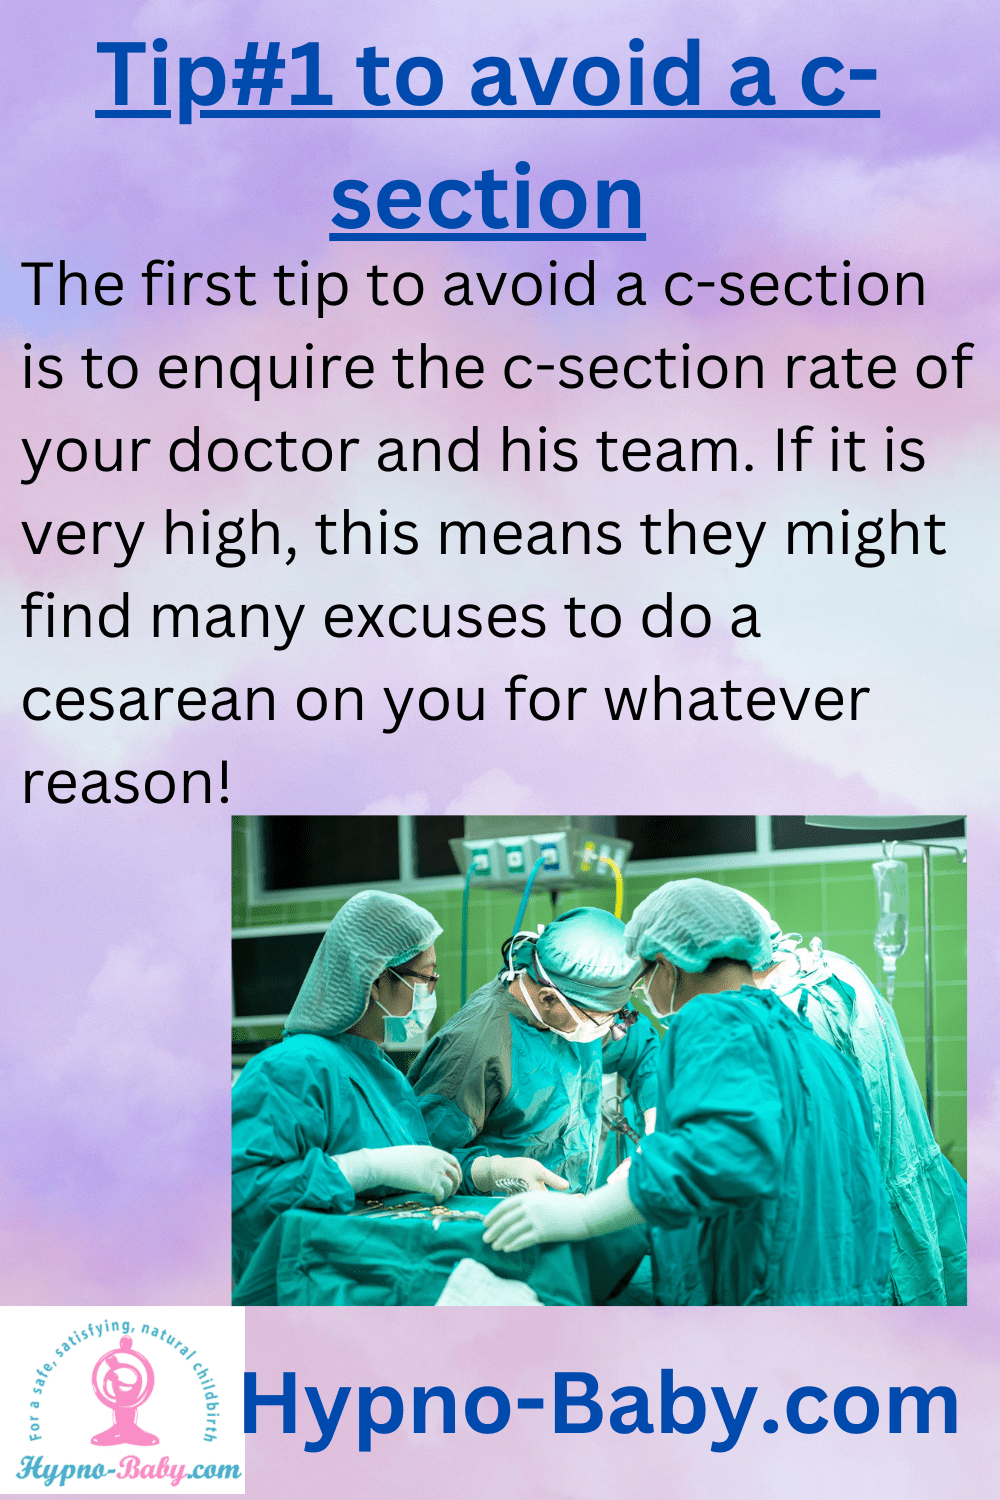 how to avoid a c-section tip#1